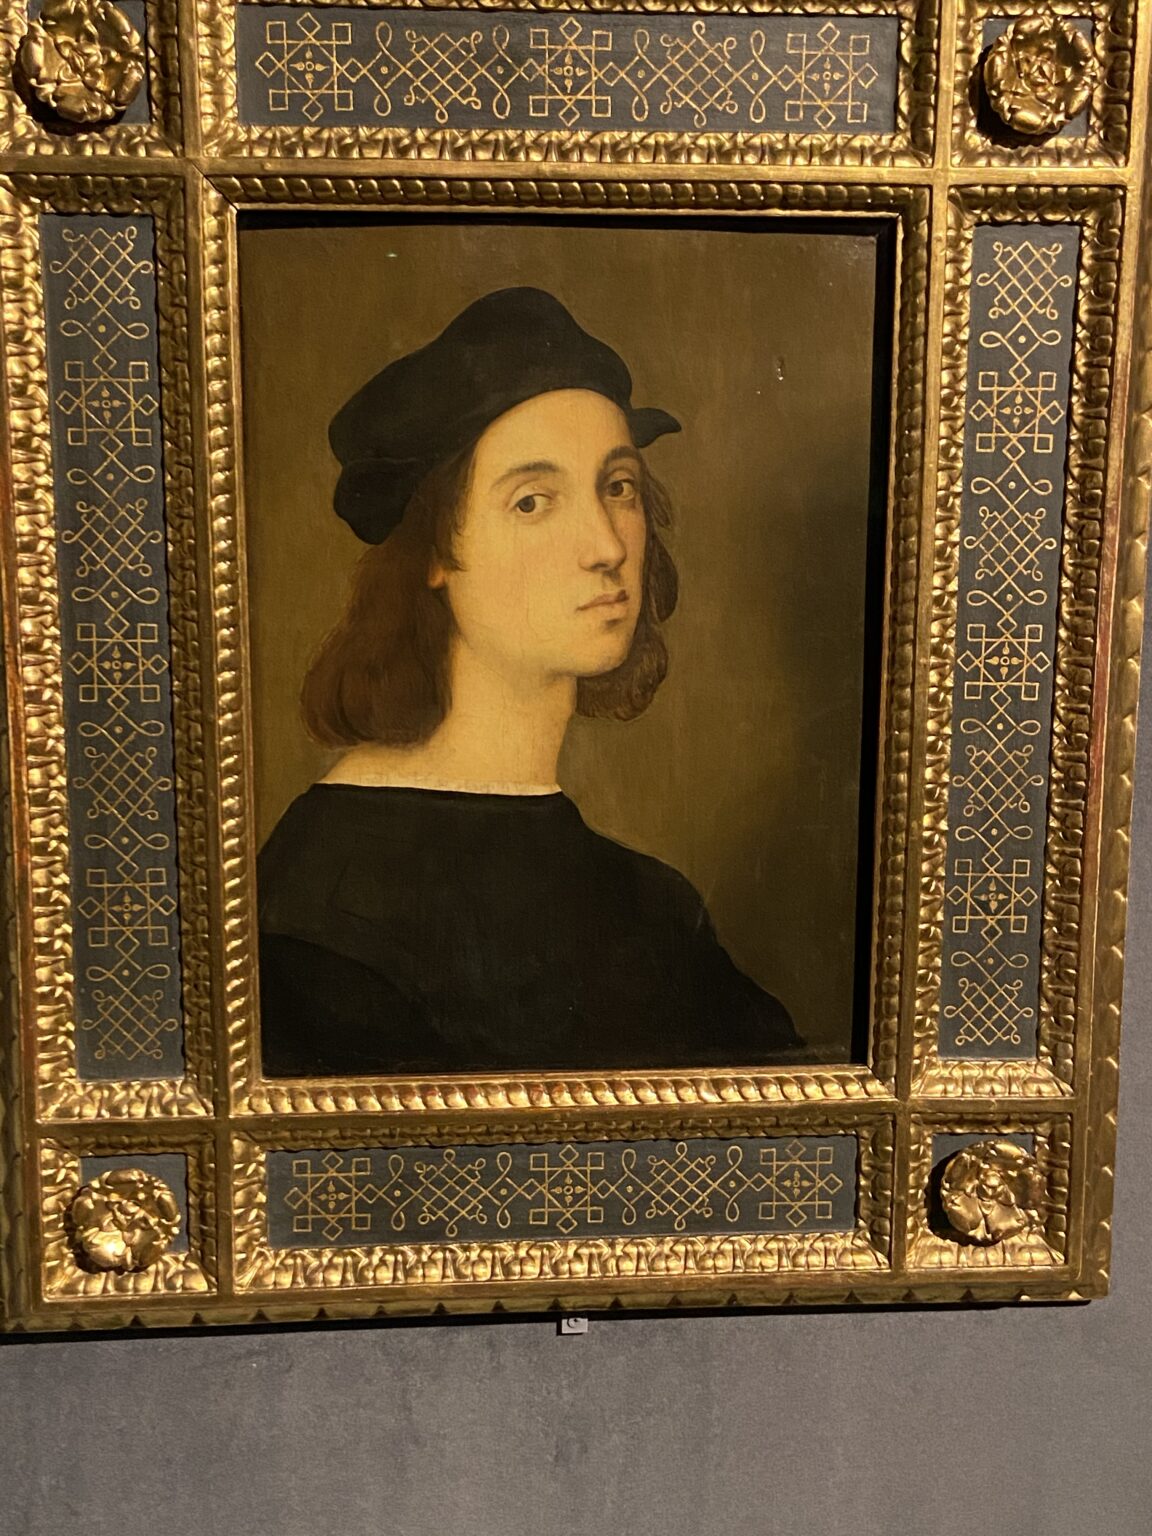 Raphael exhibition a great tour of a grand artist as Italy opens back